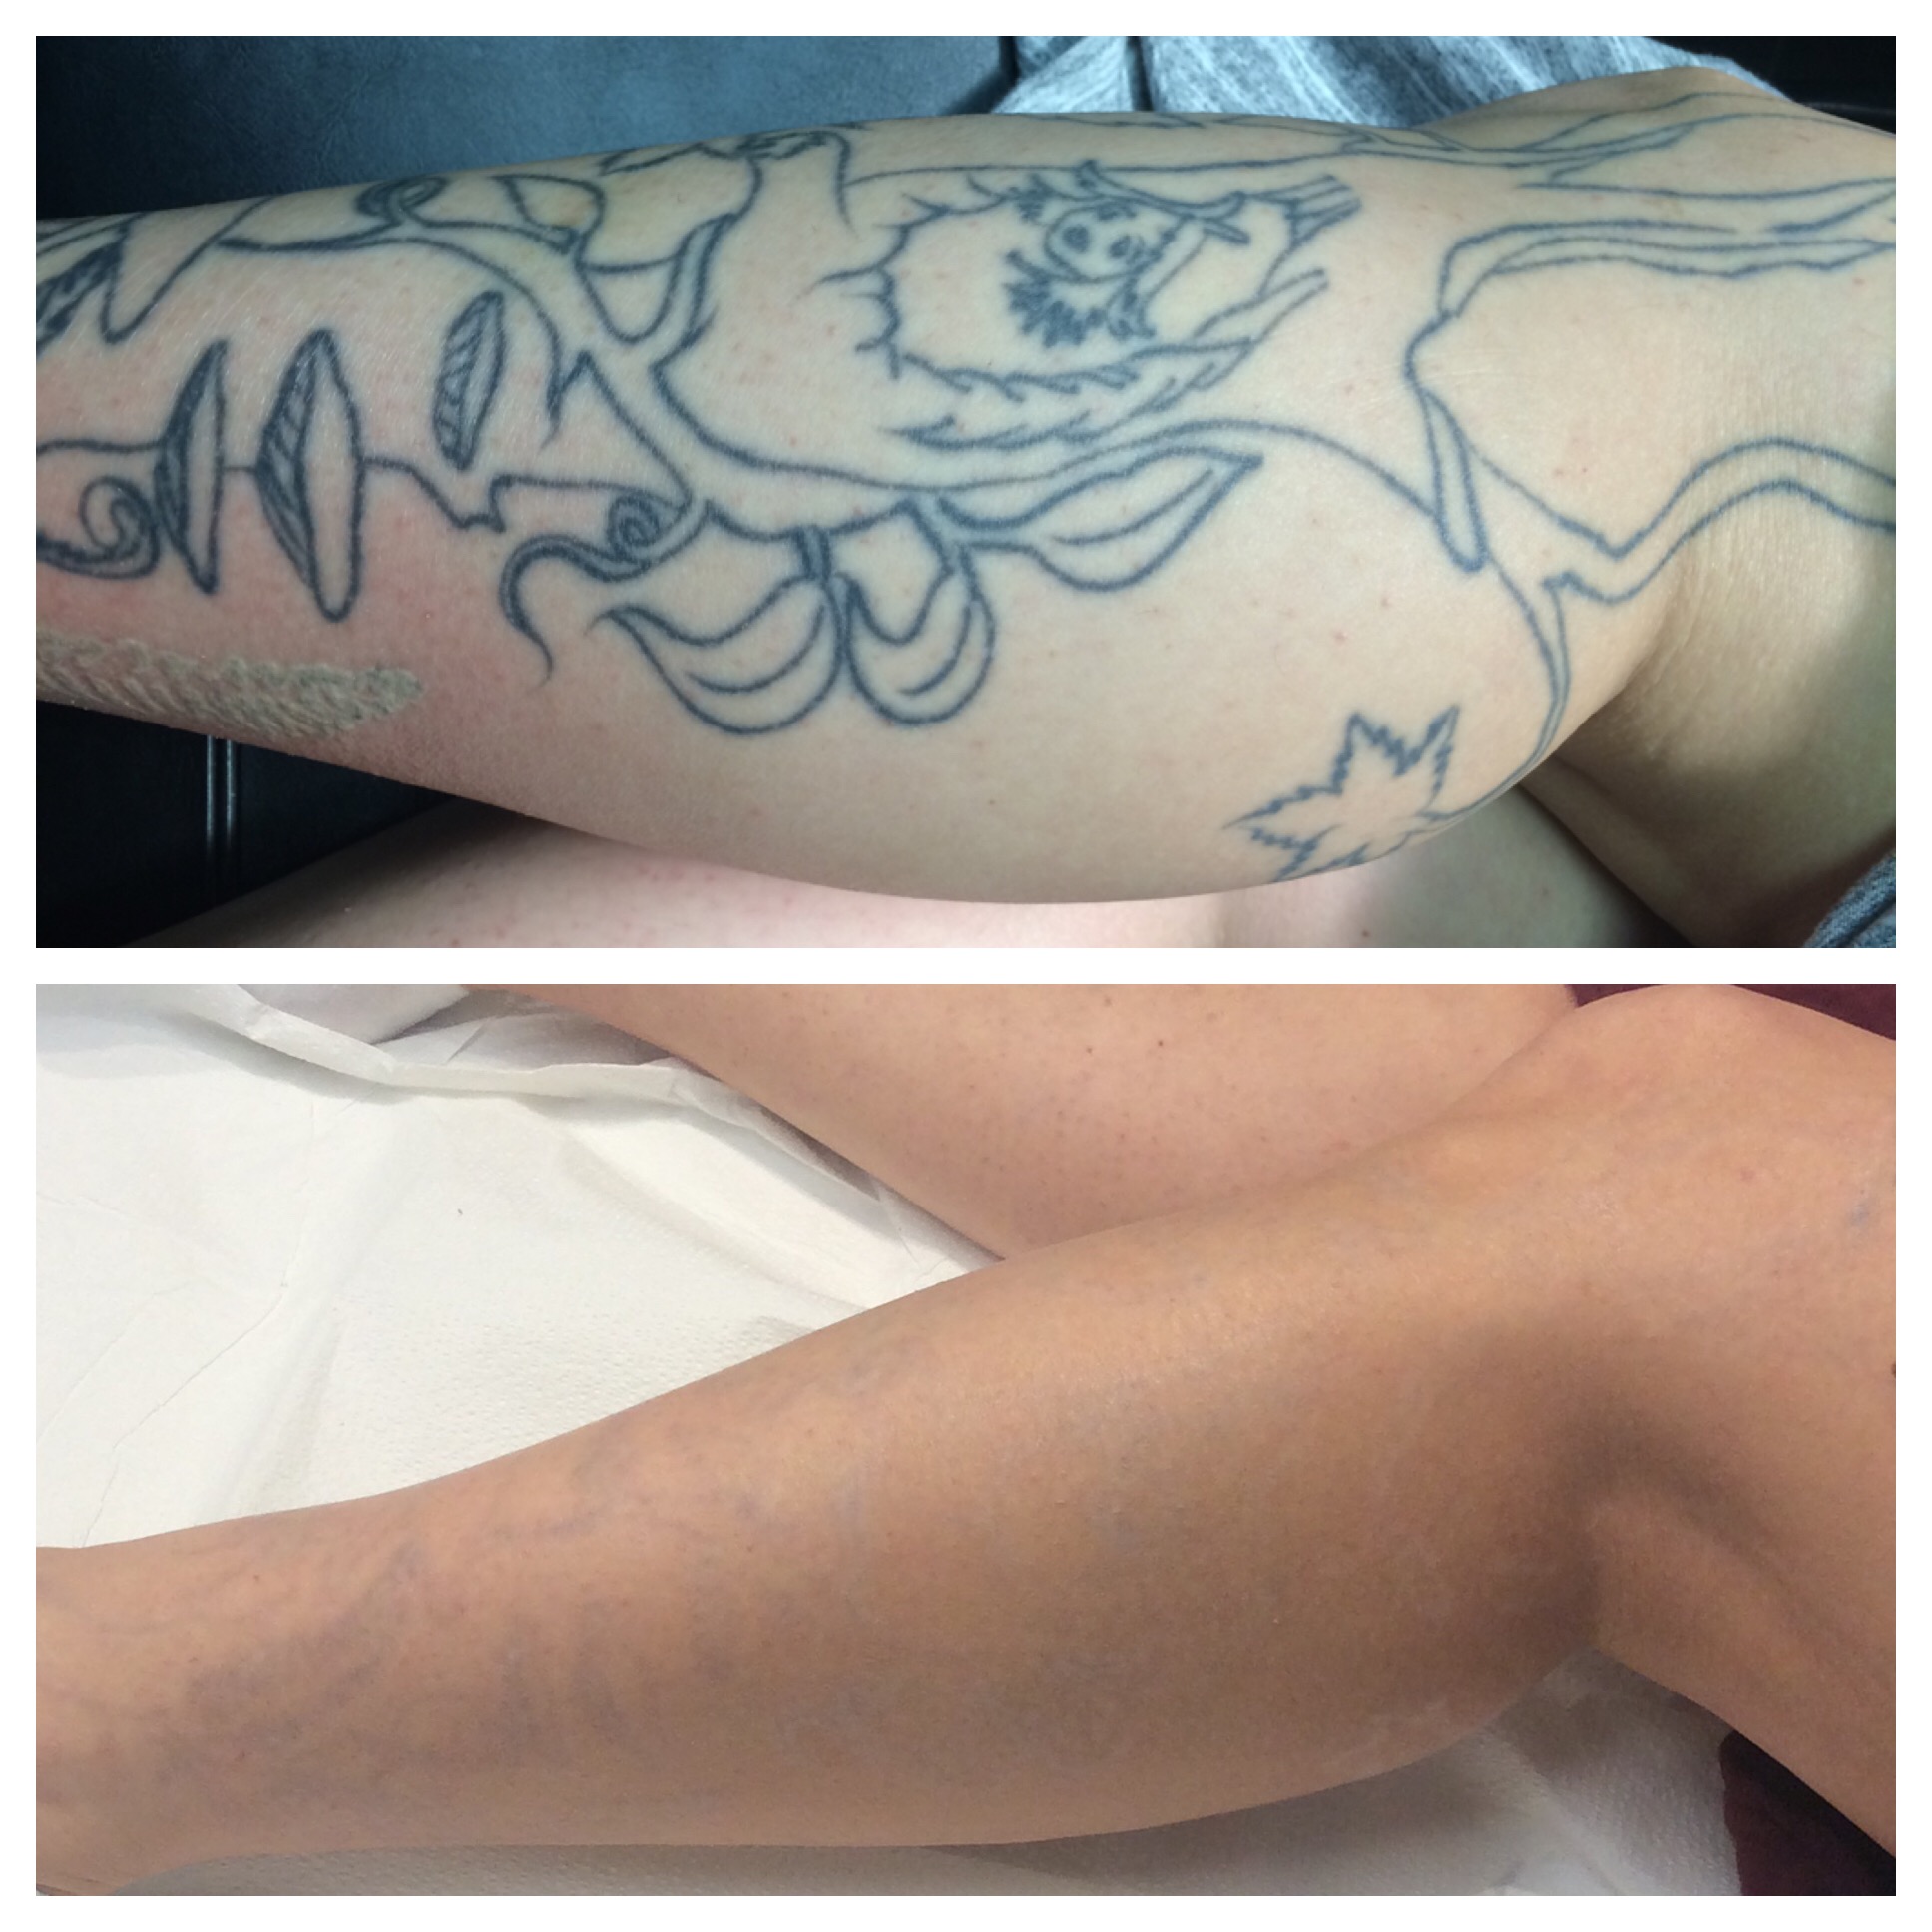 Before and after top and bottom comparison of tattoo removal for a tree tattoo on someone's calf